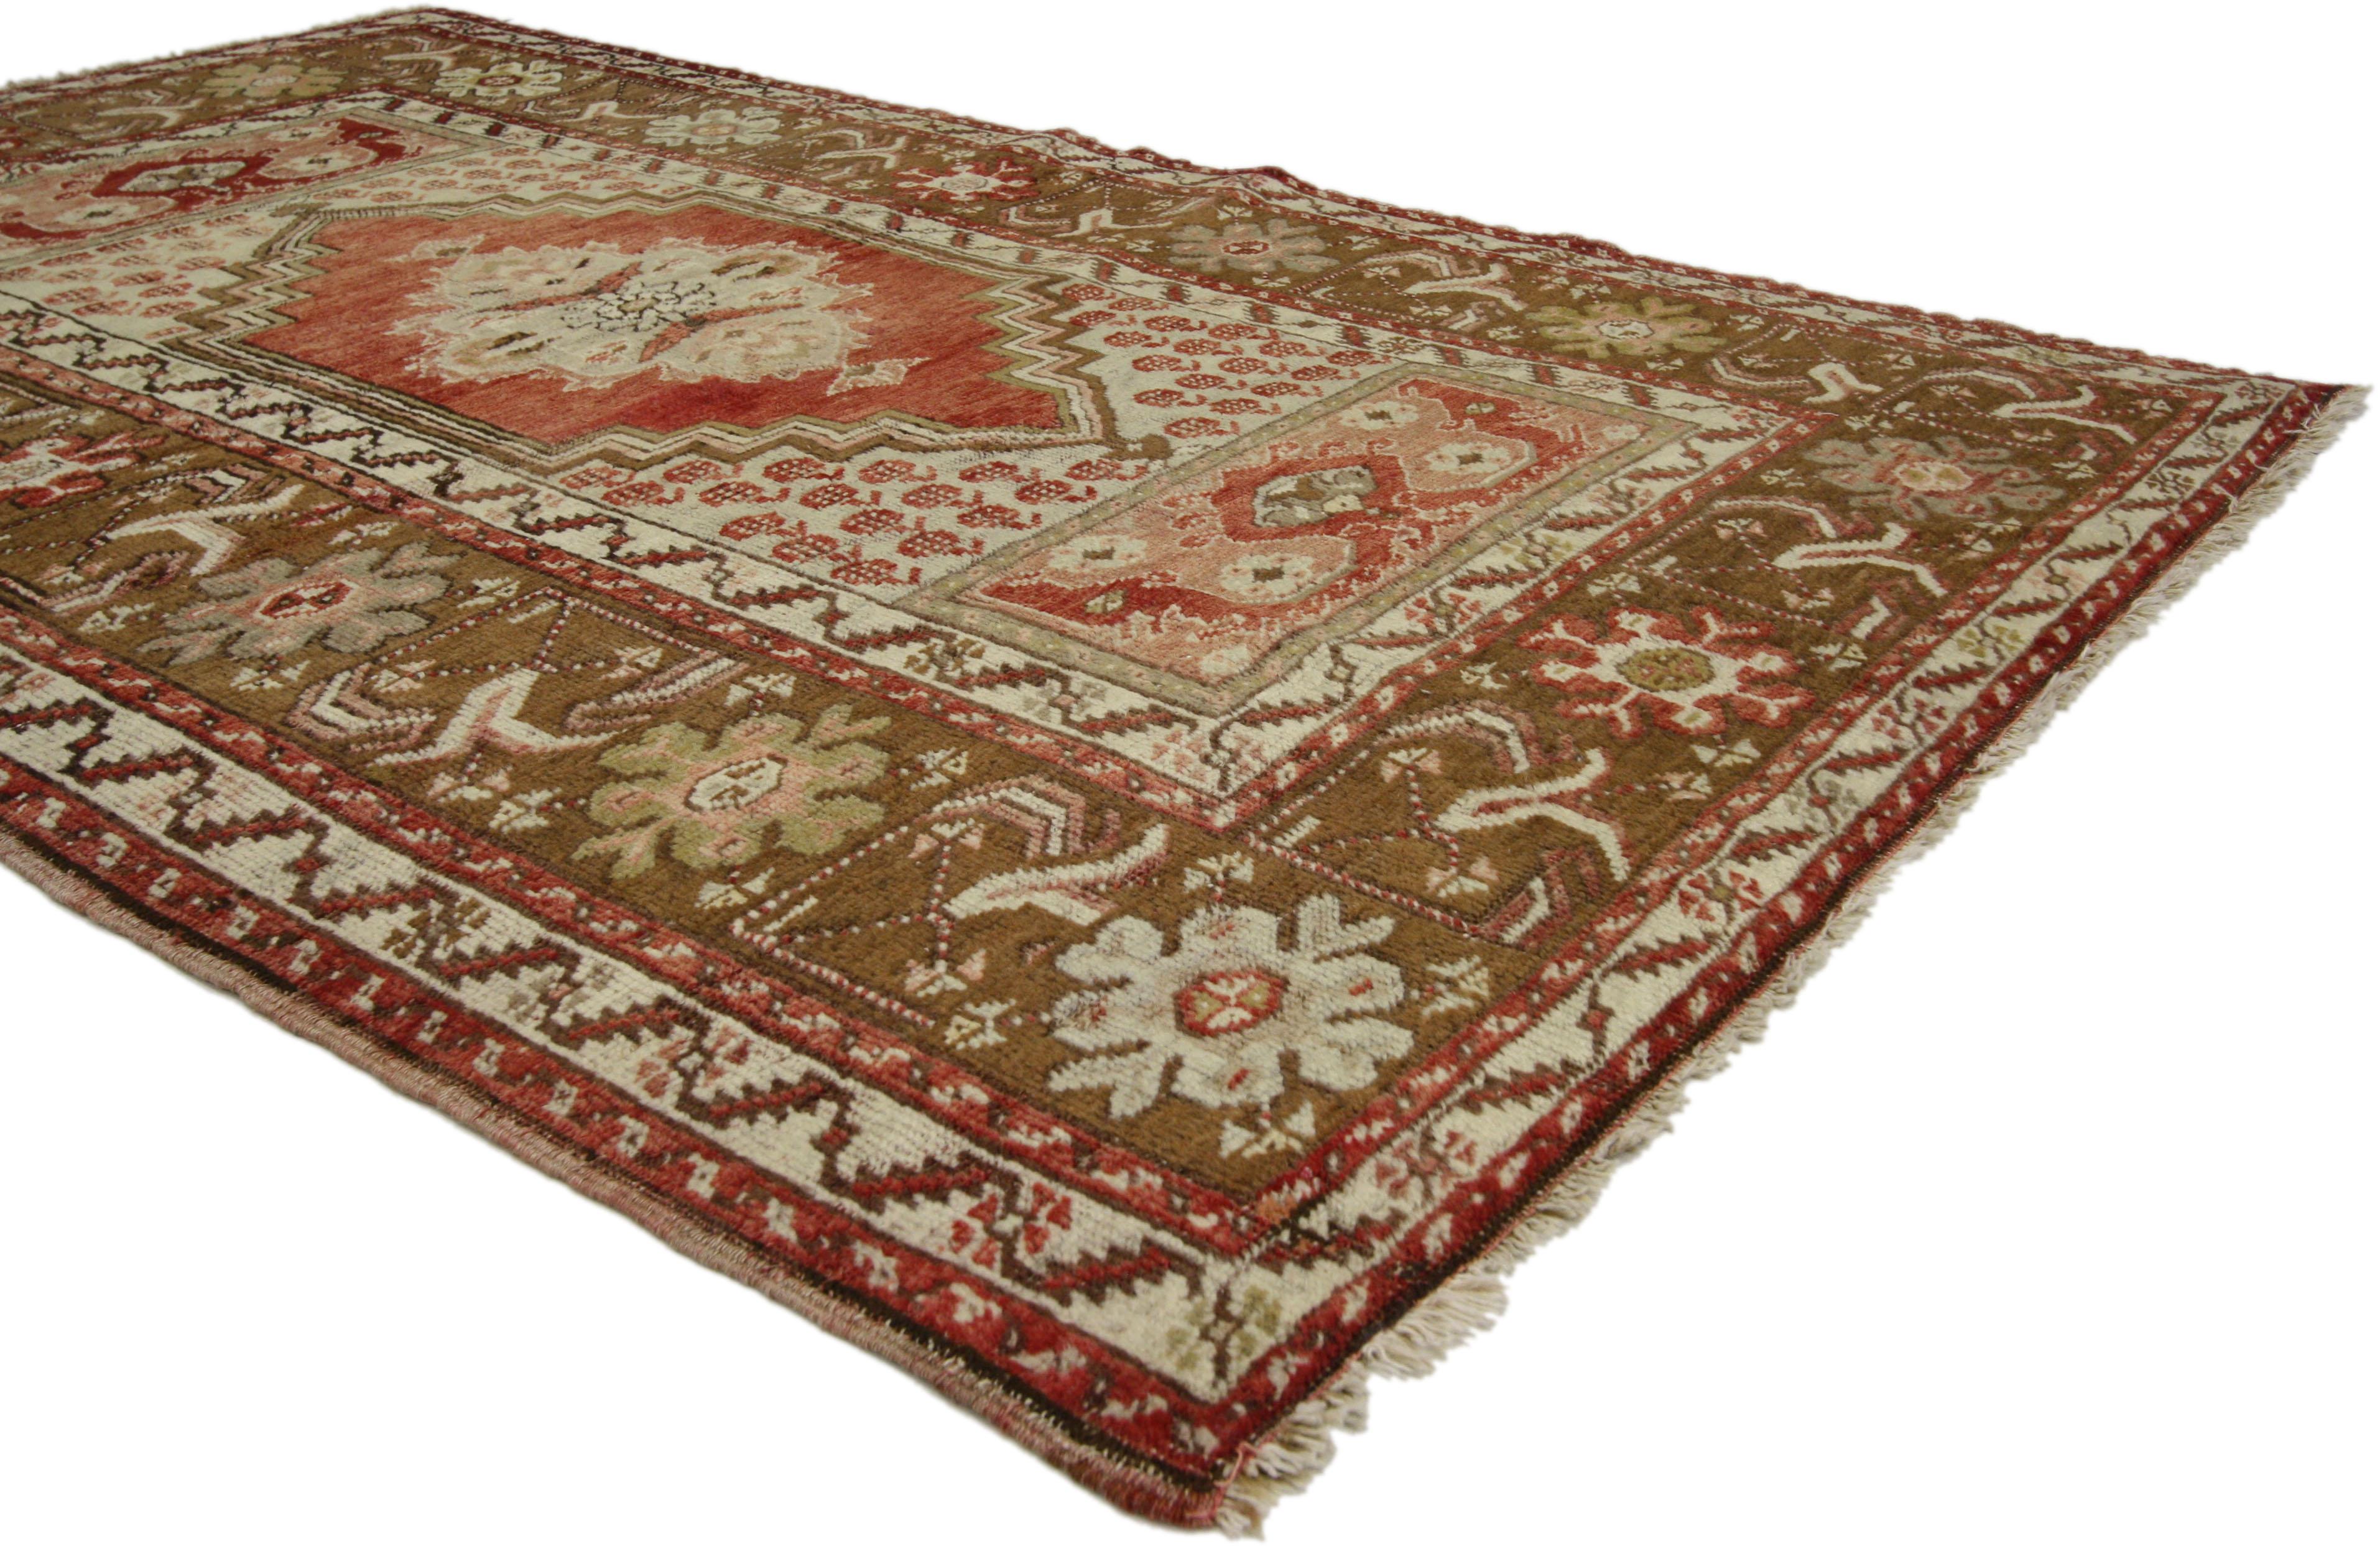 73849, vintage Turkish Oushak rug, Entry or Foyer rug. This vintage Turkish Oushak rug features a modern traditional style. Immersed in Anatolian history and refined colors, this vintage Turkish Oushak rug combines simplicity with sophistication.